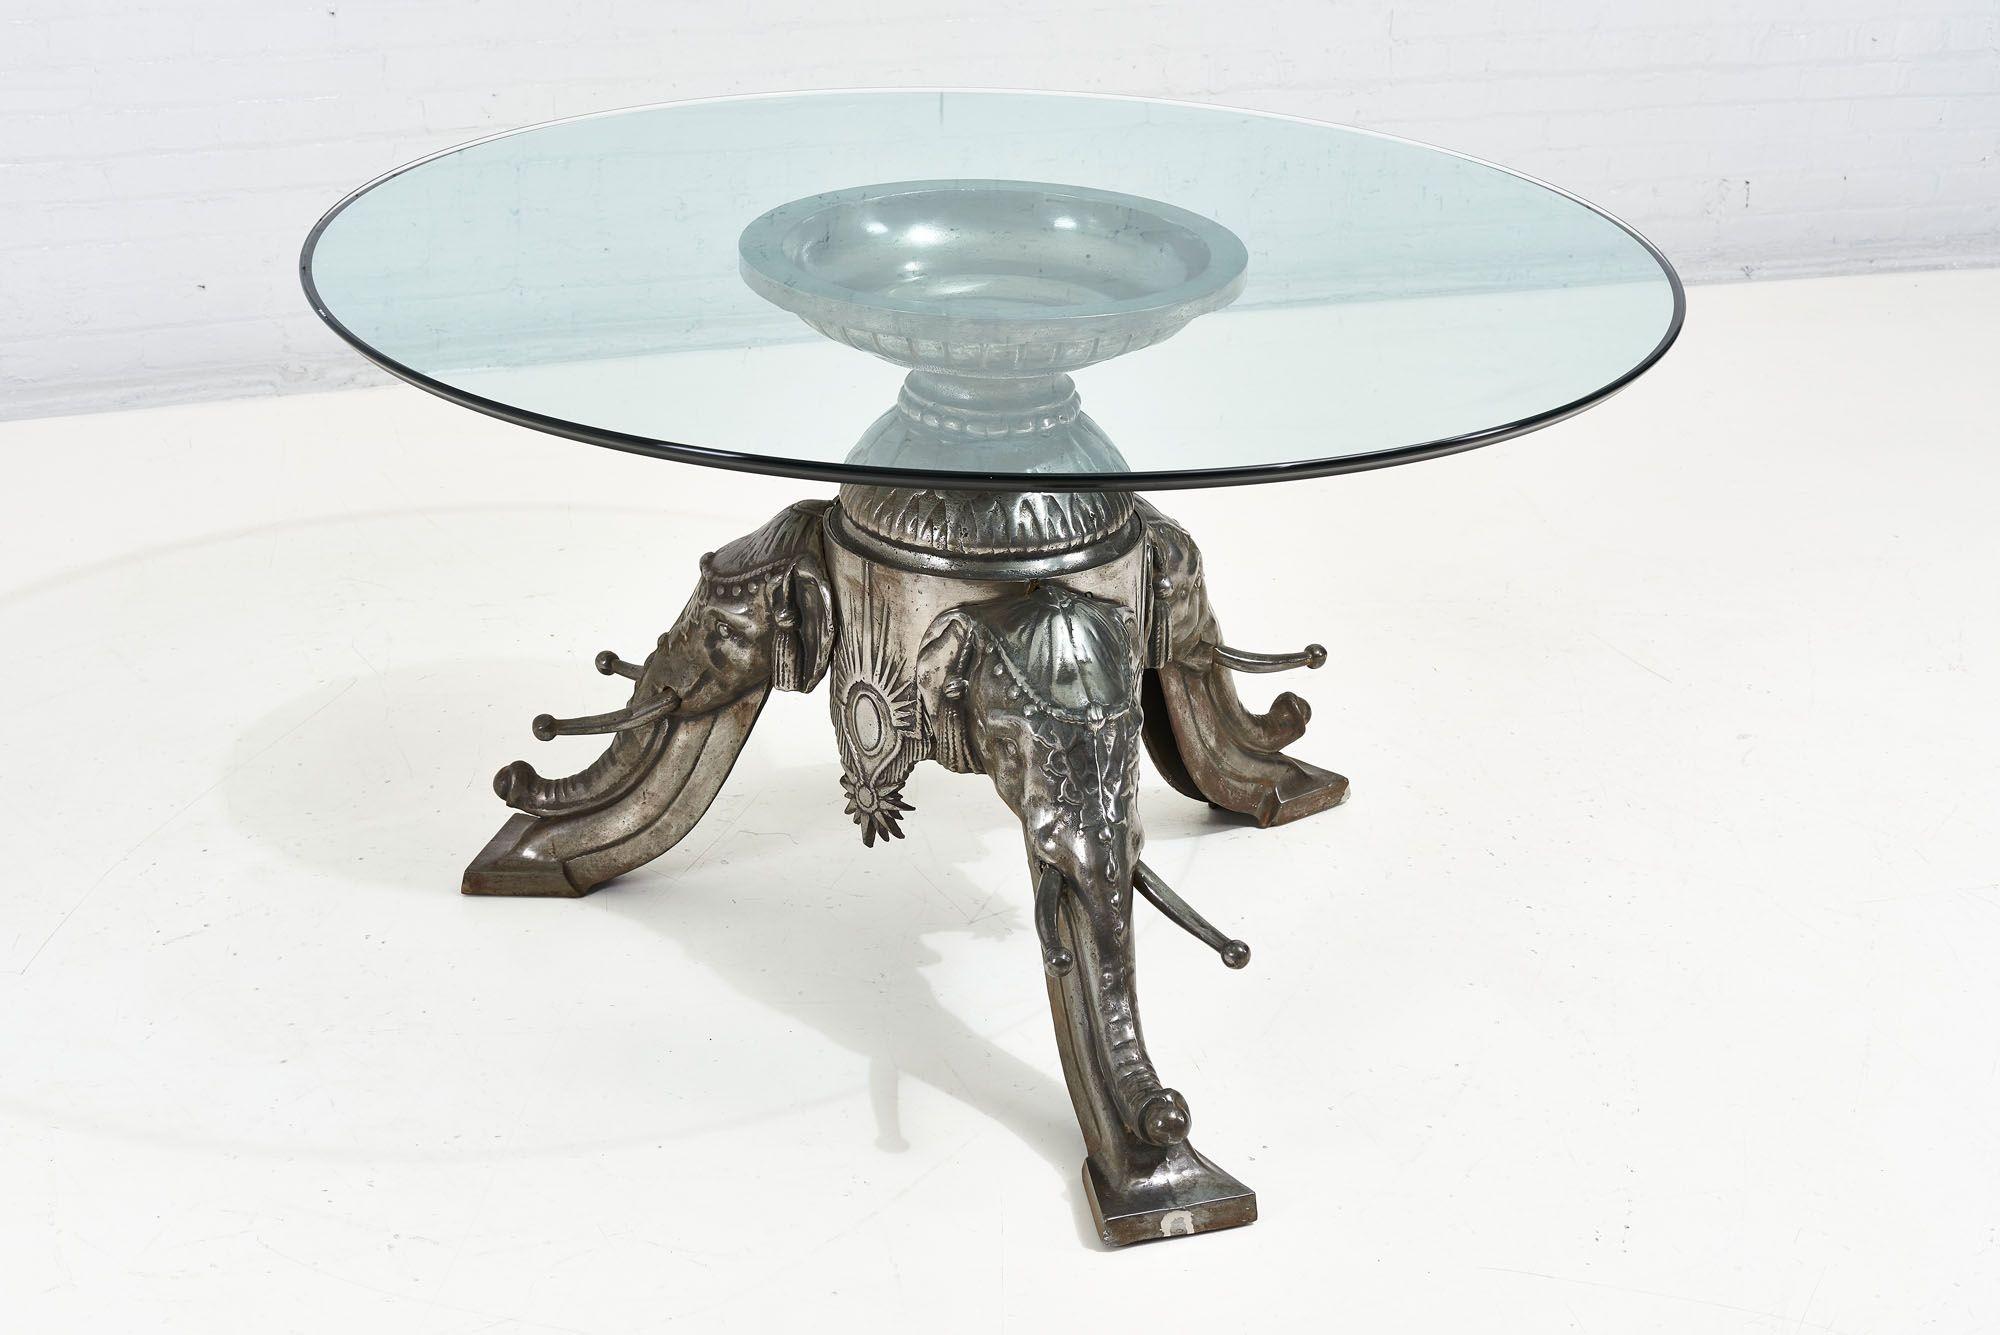 Mid Century Cast Iron Triple Elephant Head Center Dining Table, 1960. Elephant Head Pedestal Table. Table base is constructed of heavy cast iron and life like features in the elephant faces.Measures 29